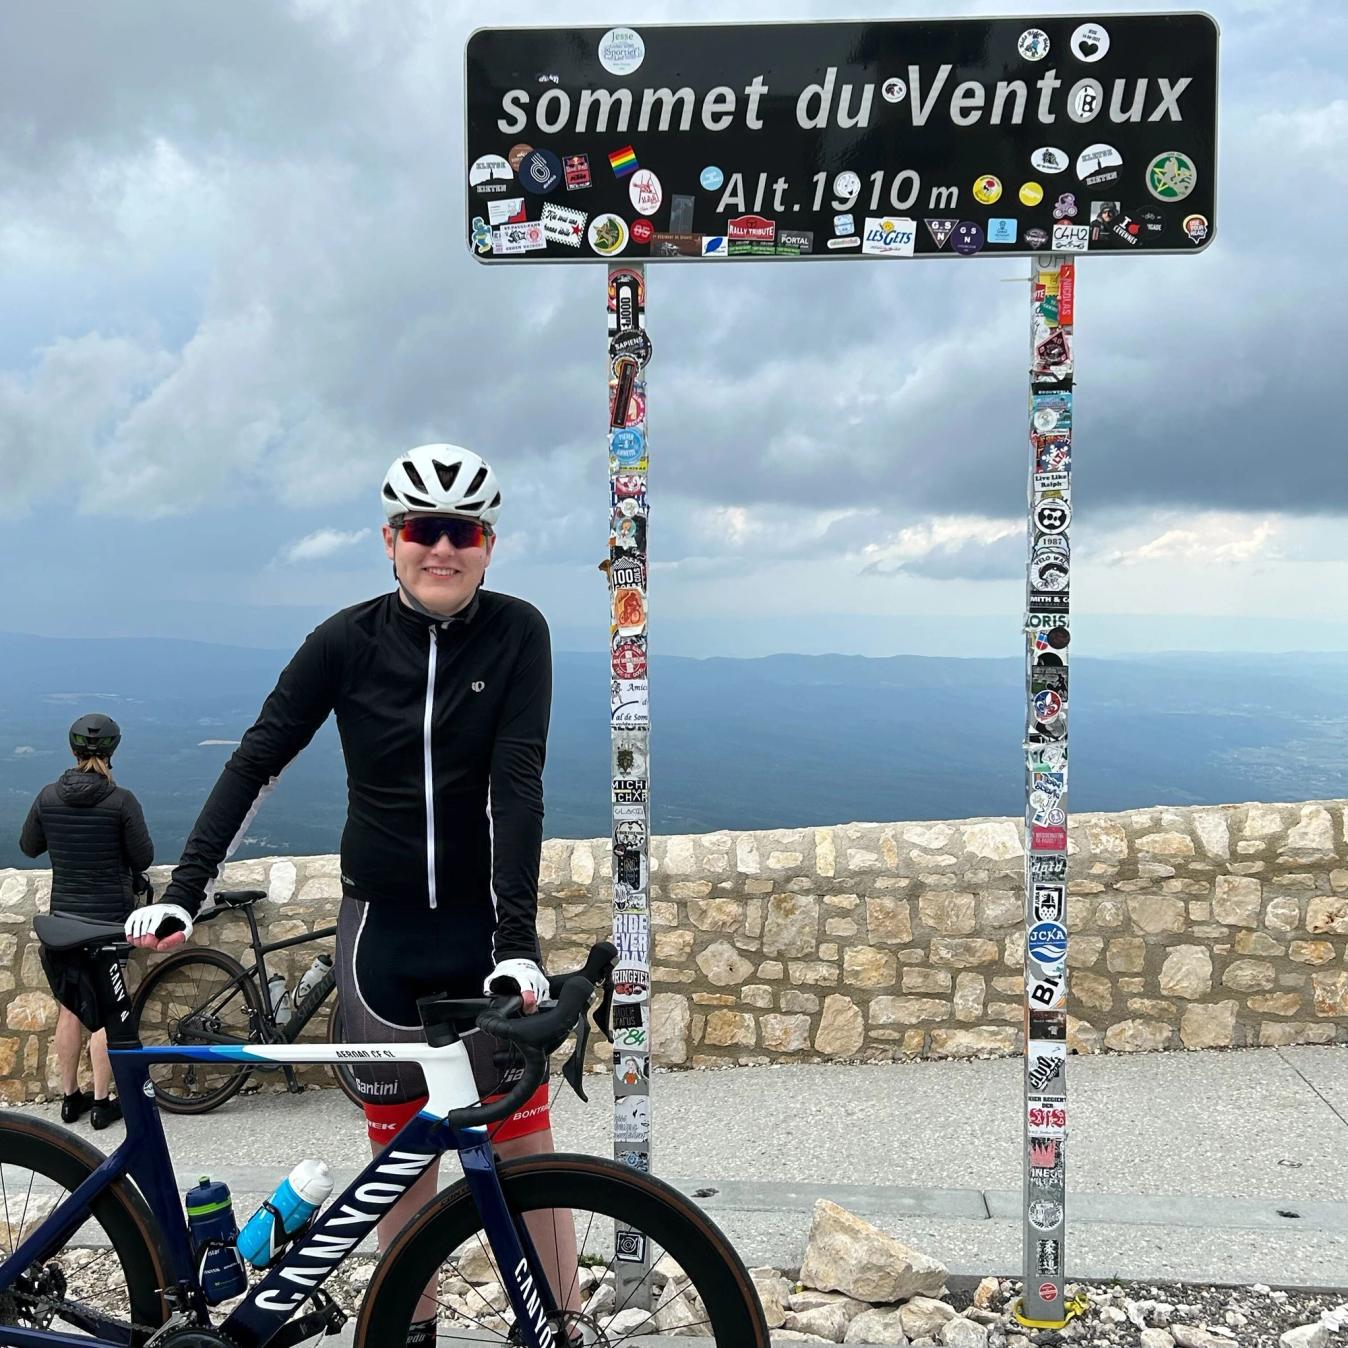 A picture with the sign at the summit is obligatory for any cyclist who climbs Mont Ventoux